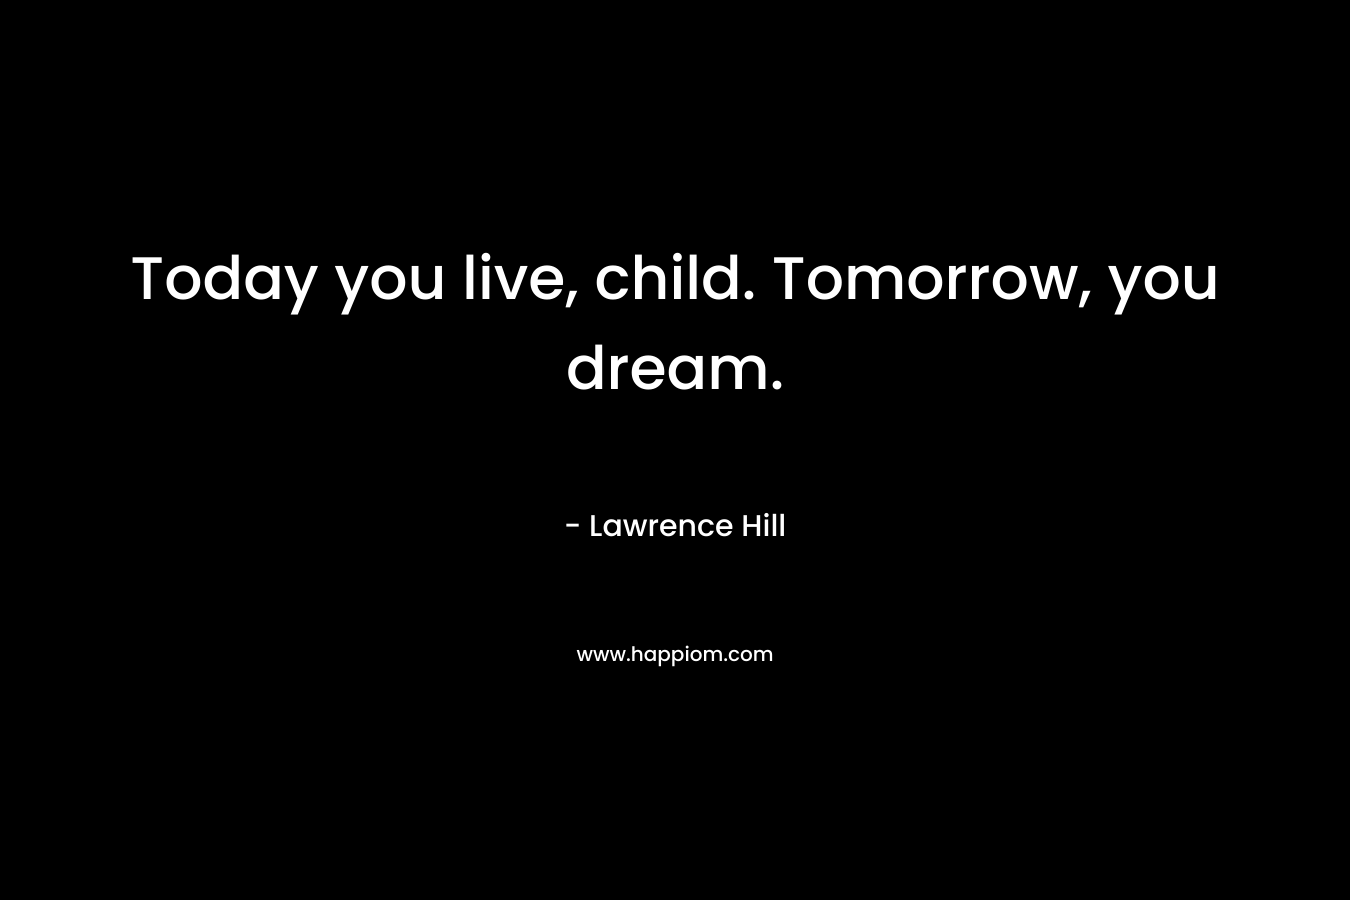 Today you live, child. Tomorrow, you dream. – Lawrence Hill